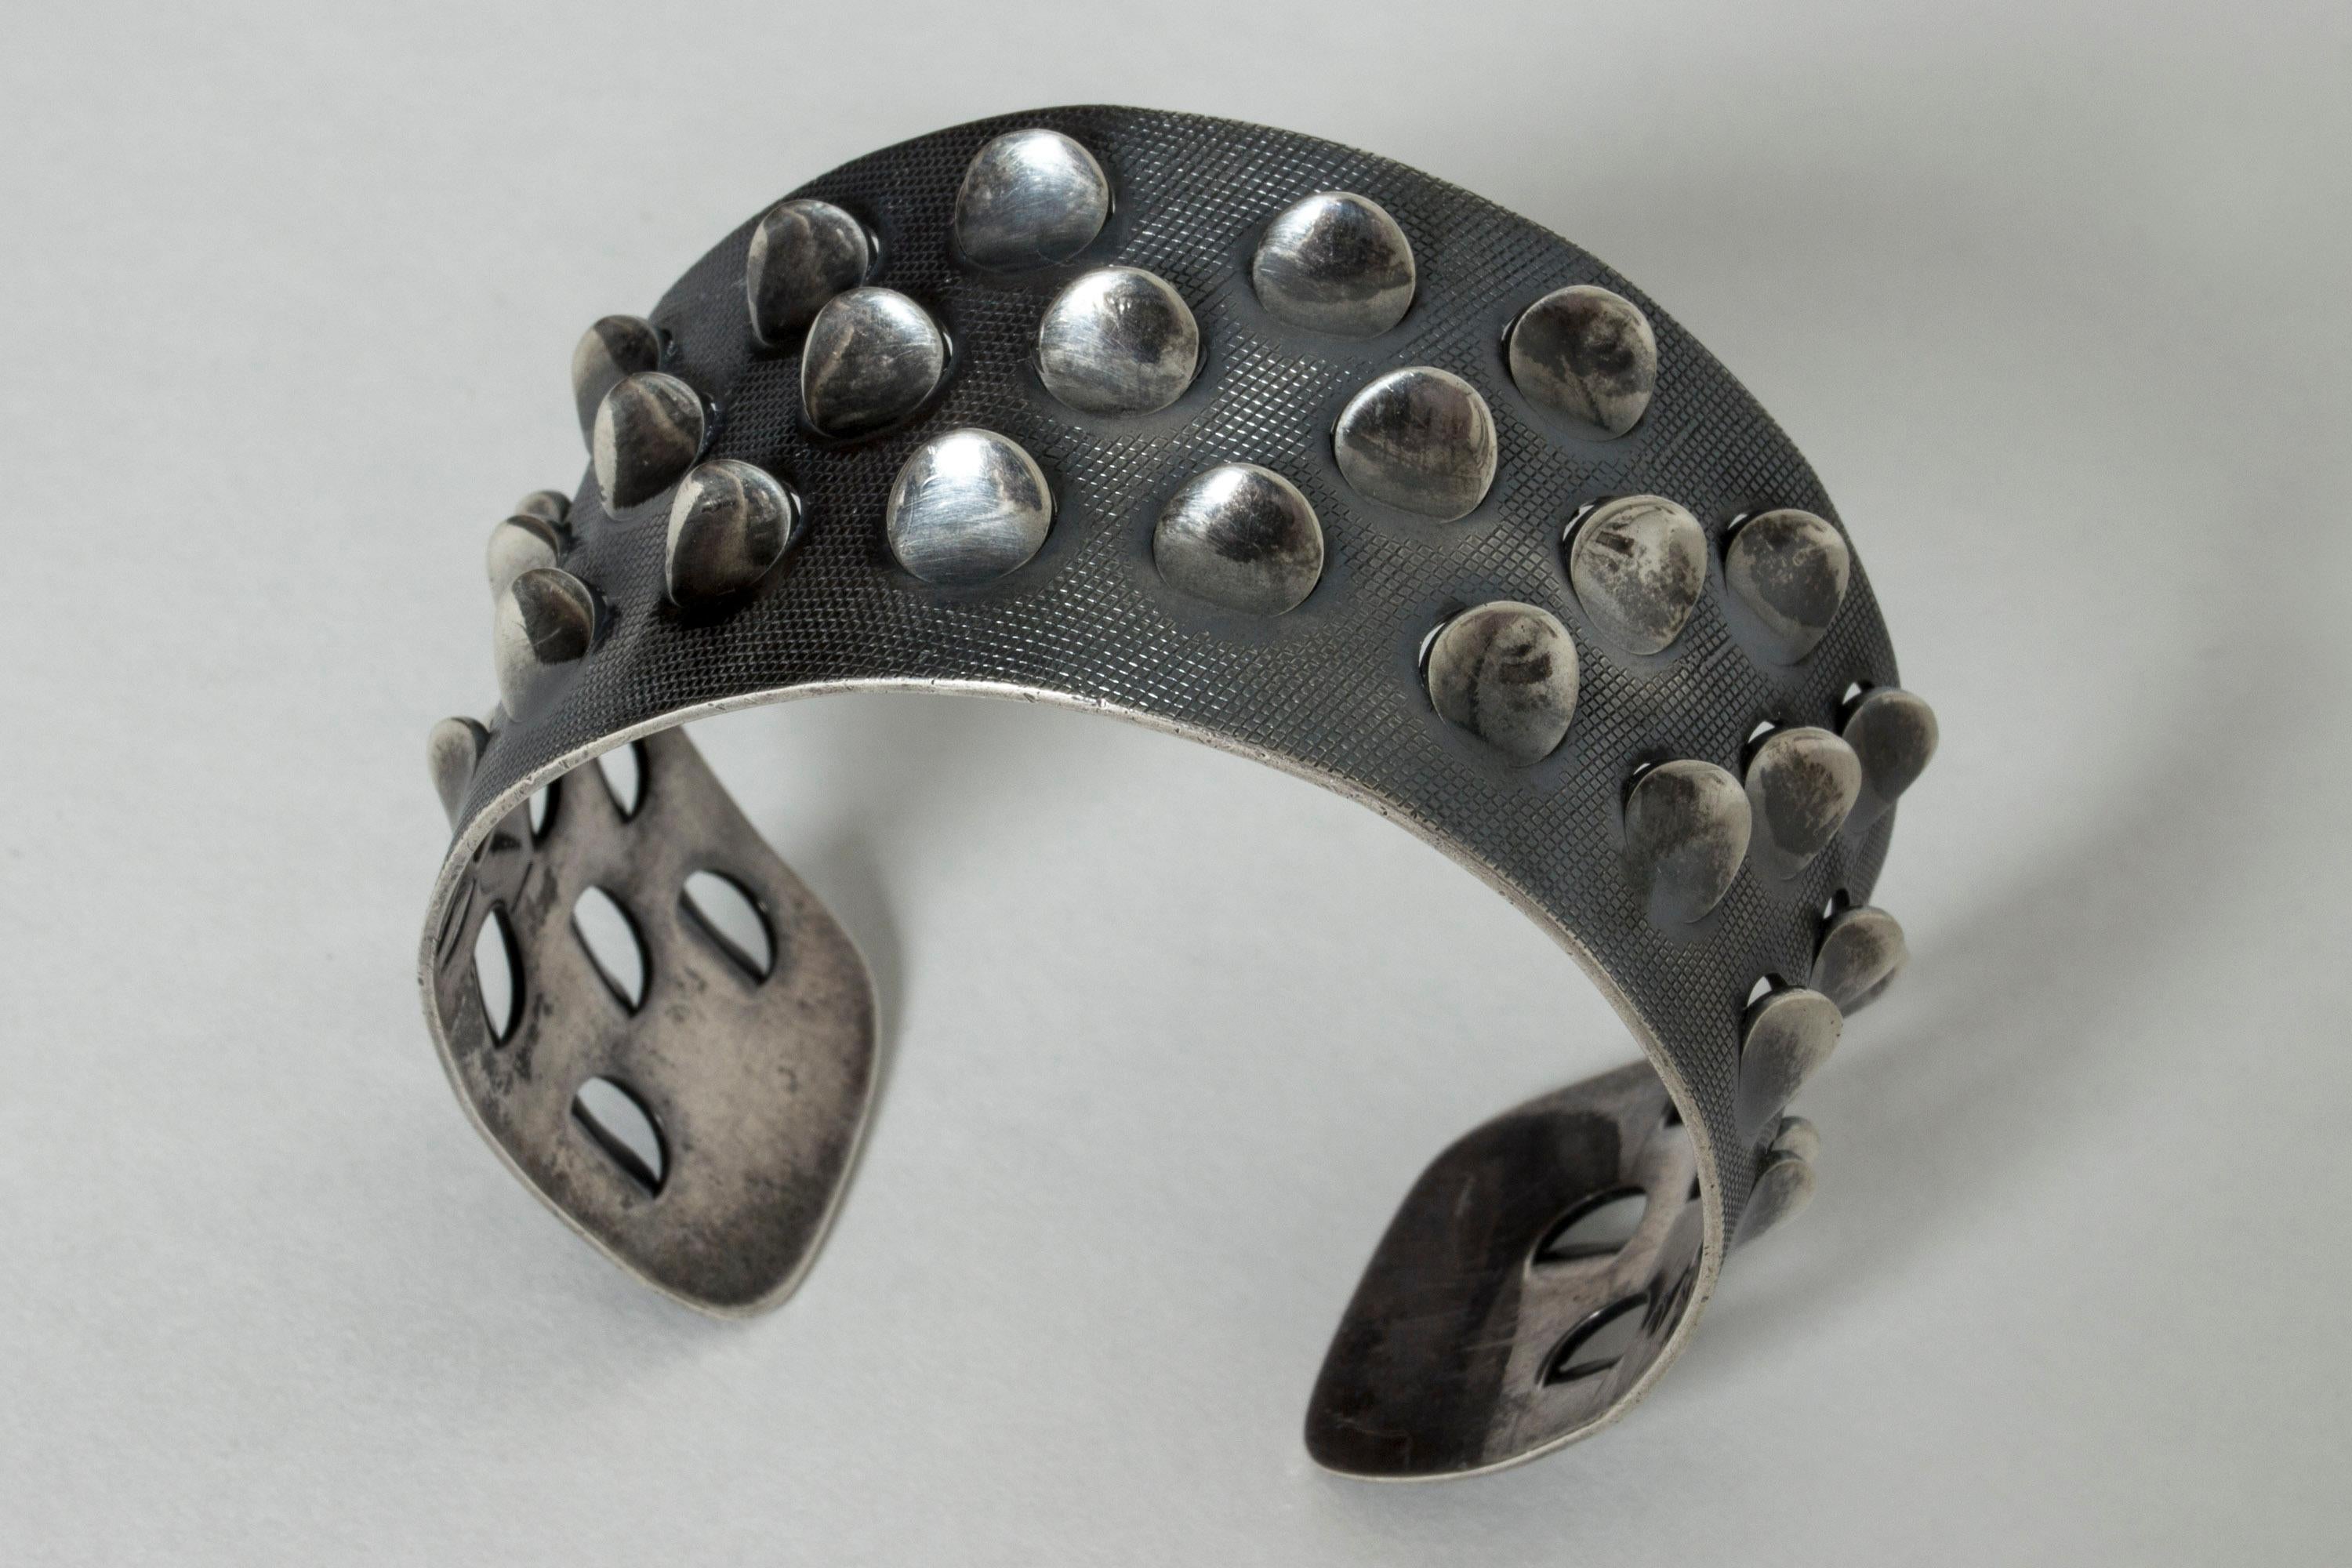 Stunning silver bracelet by Grete Prytz Kittelsen, in a cool, brutalist design with beautiful quality. The bracelet has an industrial pattern that serves as backdrop to the petallike flaps emerging from the surface. Wonderful play between hardcore